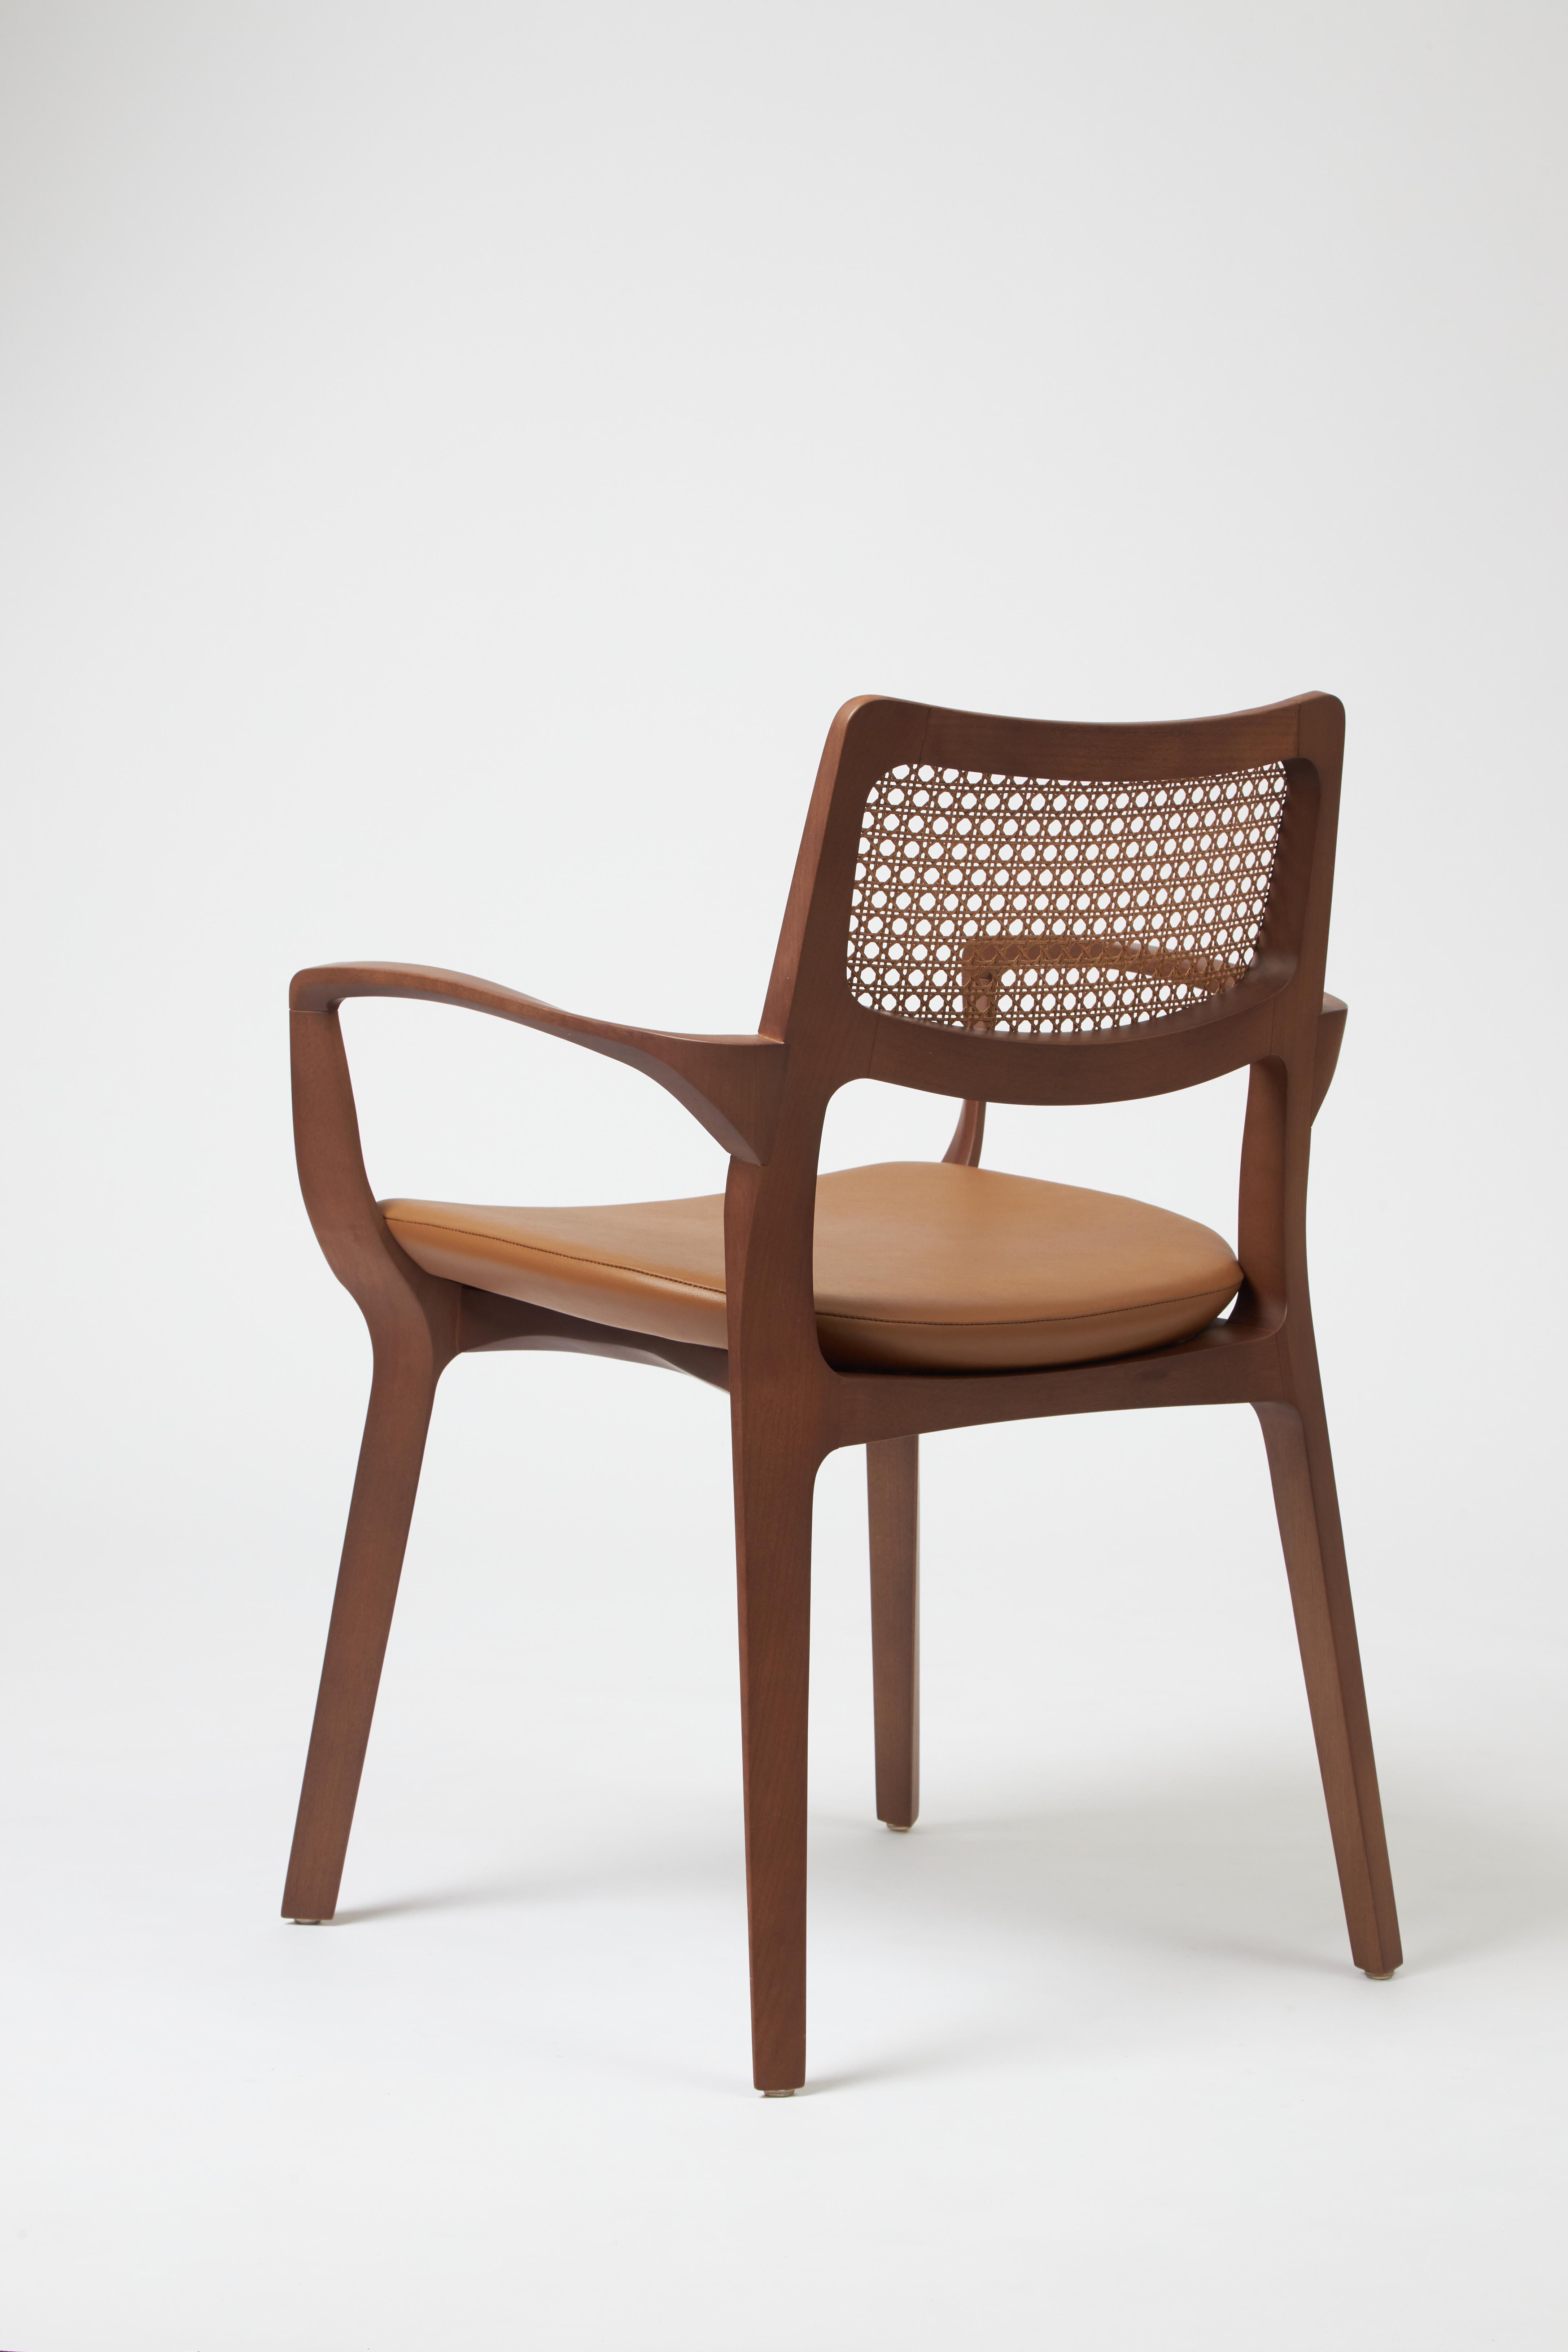 Caning Modern Style Aurora Chair Sculpted in Walnut Finish Arms, leather seating, cane For Sale